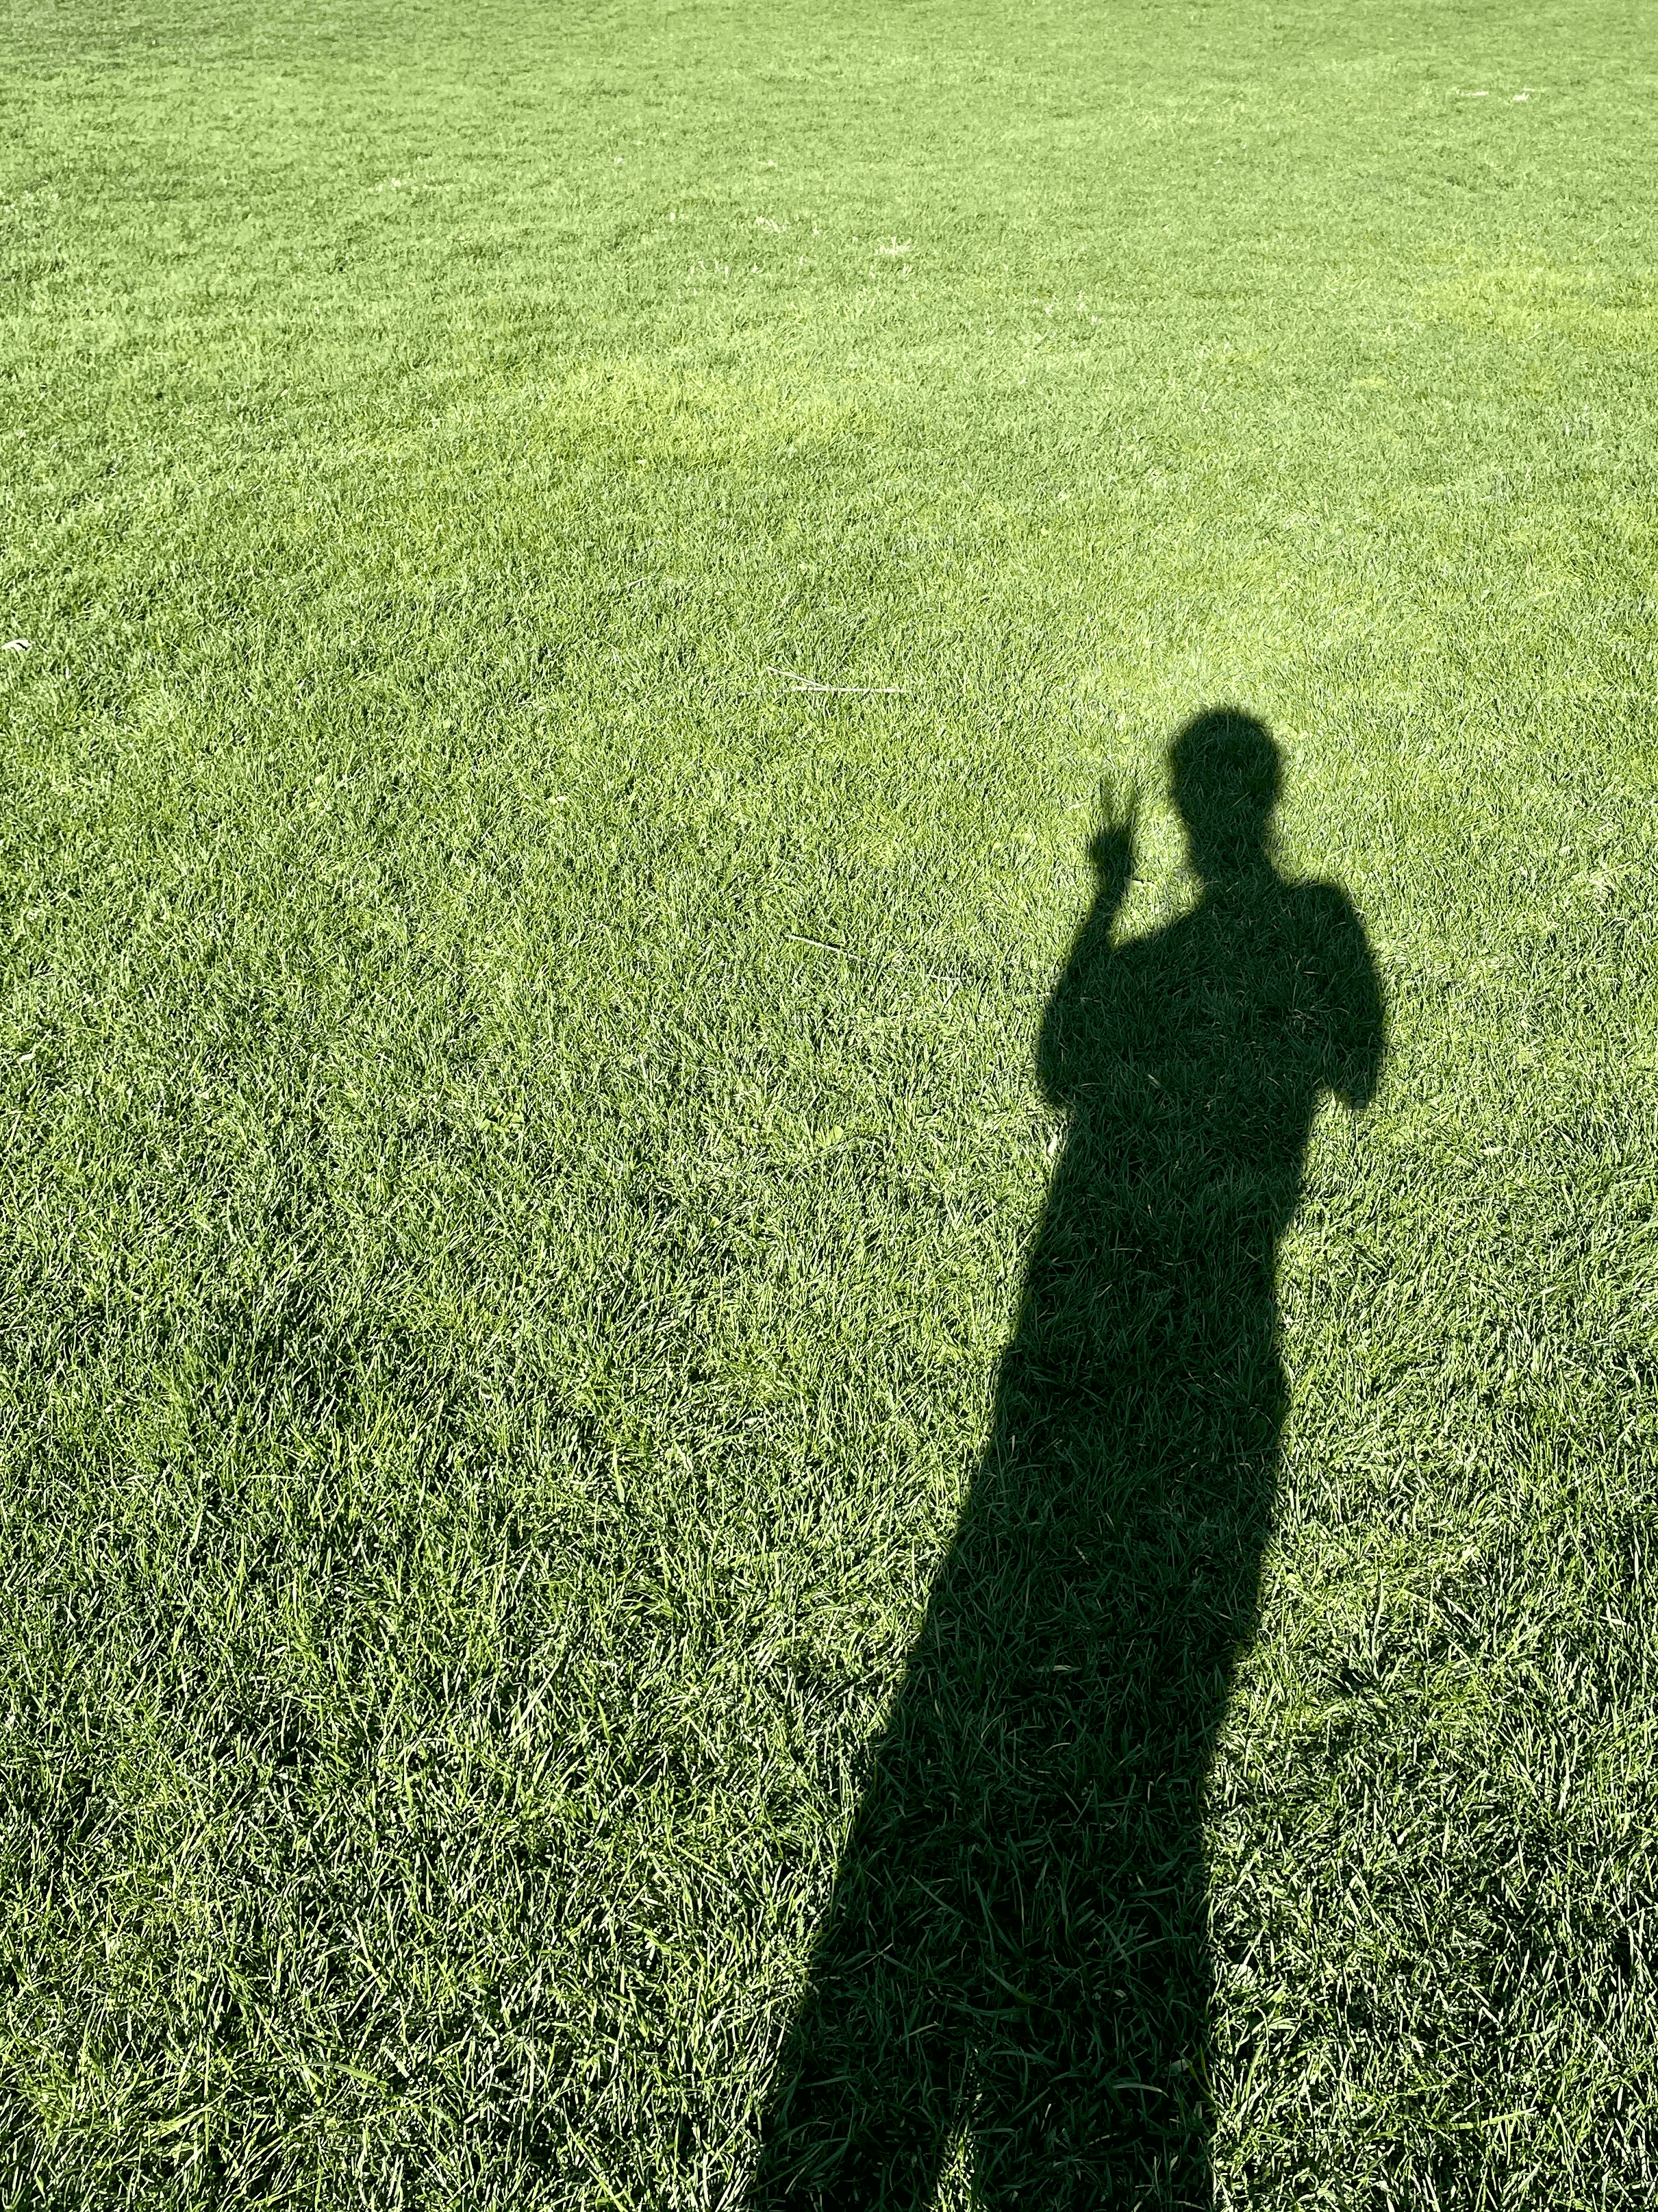 Shadow of a girl on grass